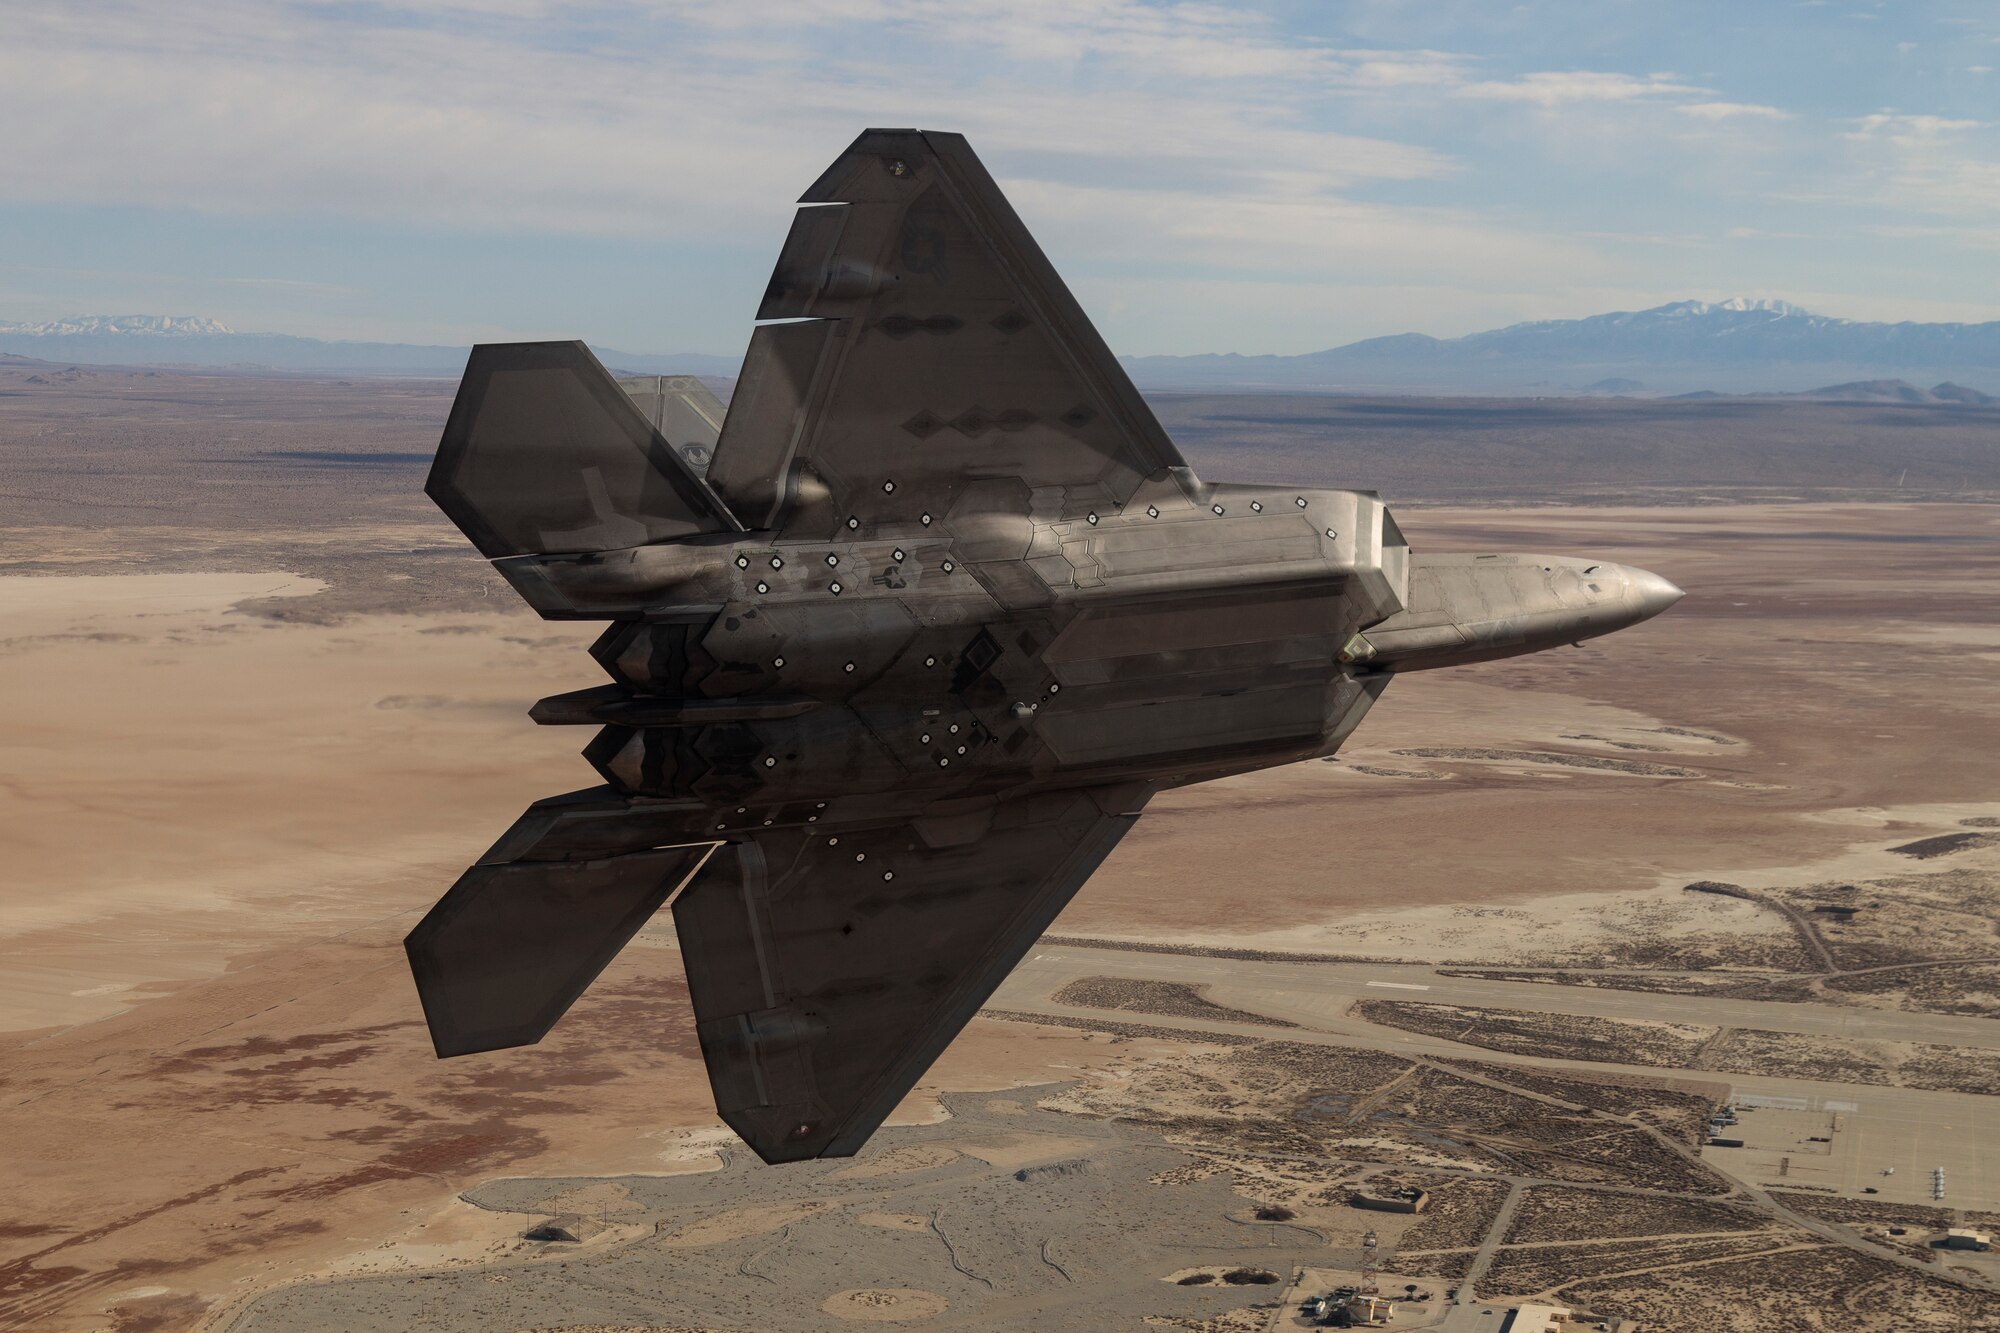 F-22 Raptors assigned to the 411th Flight Test Squadron, 412th Test Wing, out of Edwards Air Force Base, California, conduct a test sortie over the Pacific Ocean, Feb. 3. (Photo courtesy of Kyle Larson/Lockheed Martin)